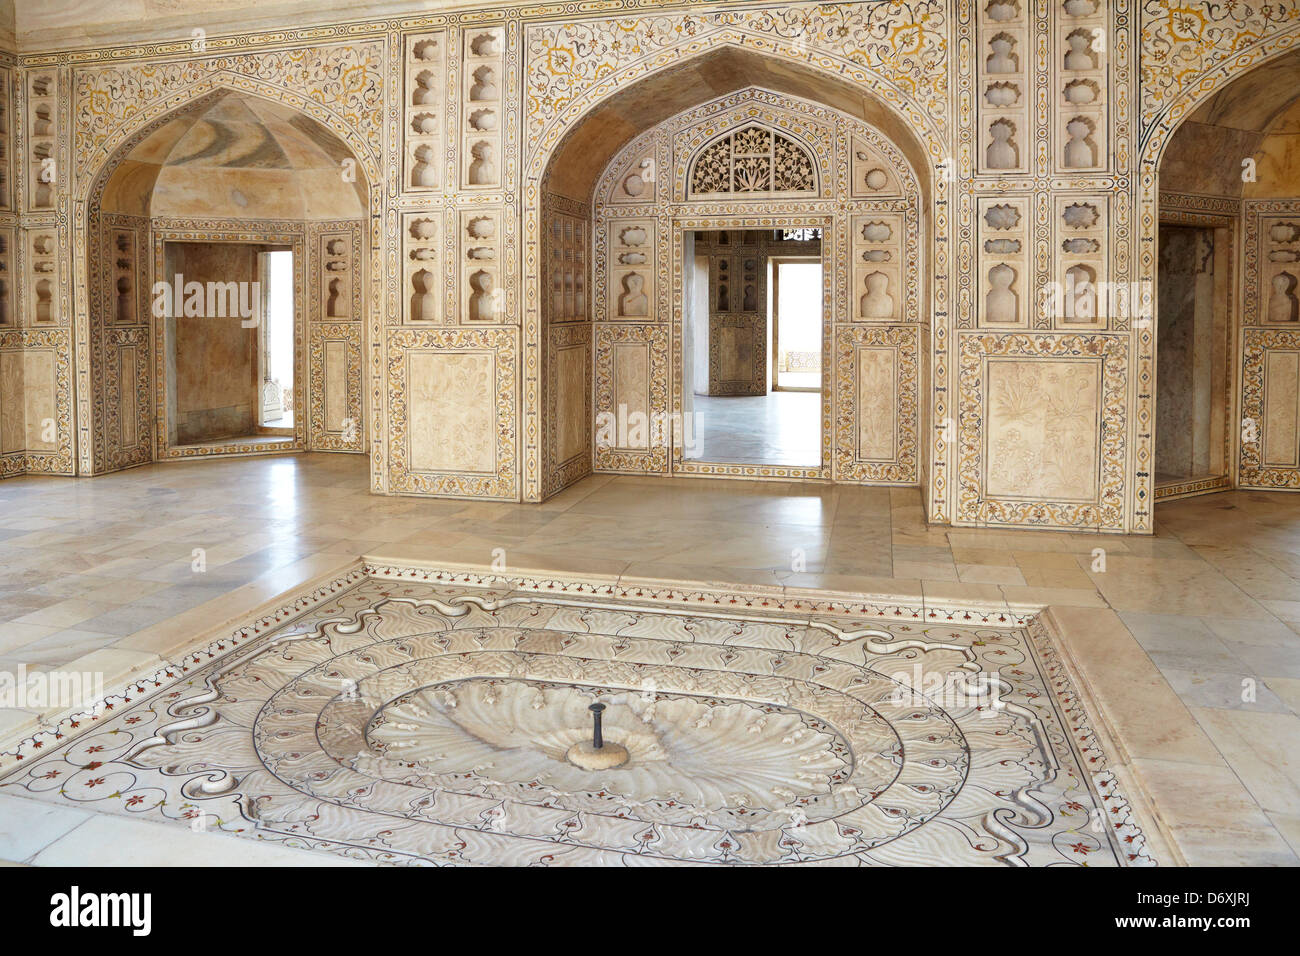 Agra, Red Fort - interior of the Khas Mahal central pavilion with indoor fountain and stone reliefs, Agra, India Stock Photo